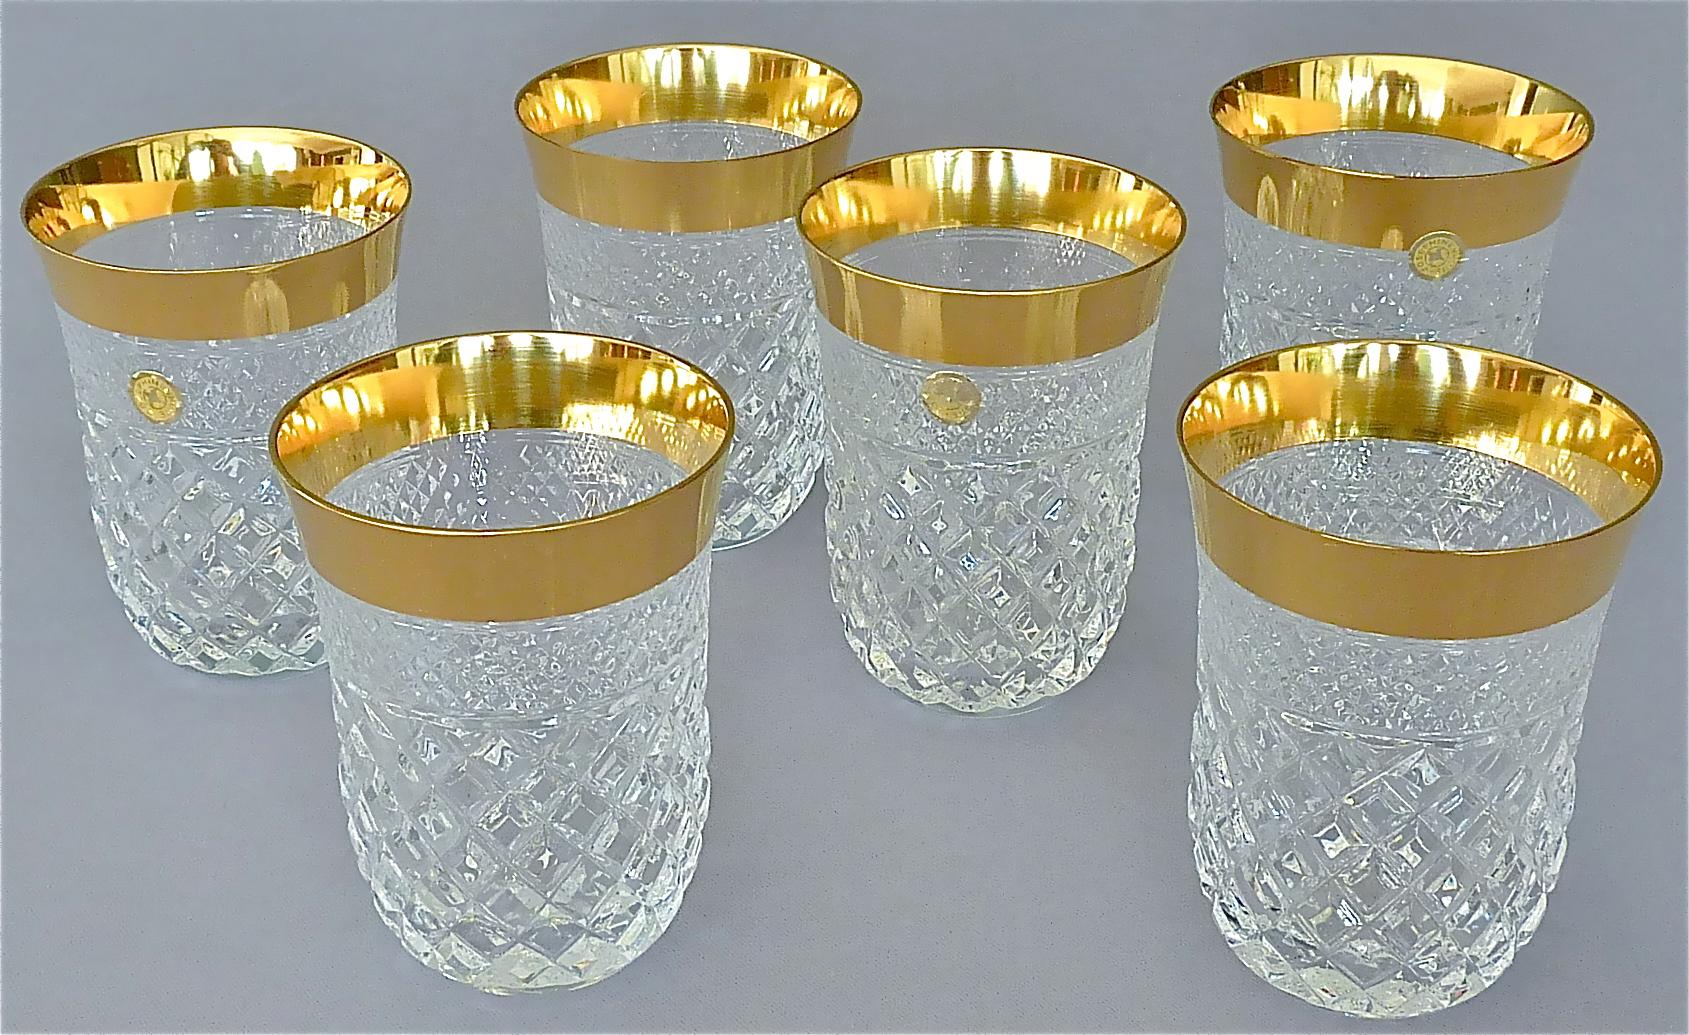 Faceted Precious 6 Water Glasses Gold Crystal Glass Tumbler Josephinenhuette Moser